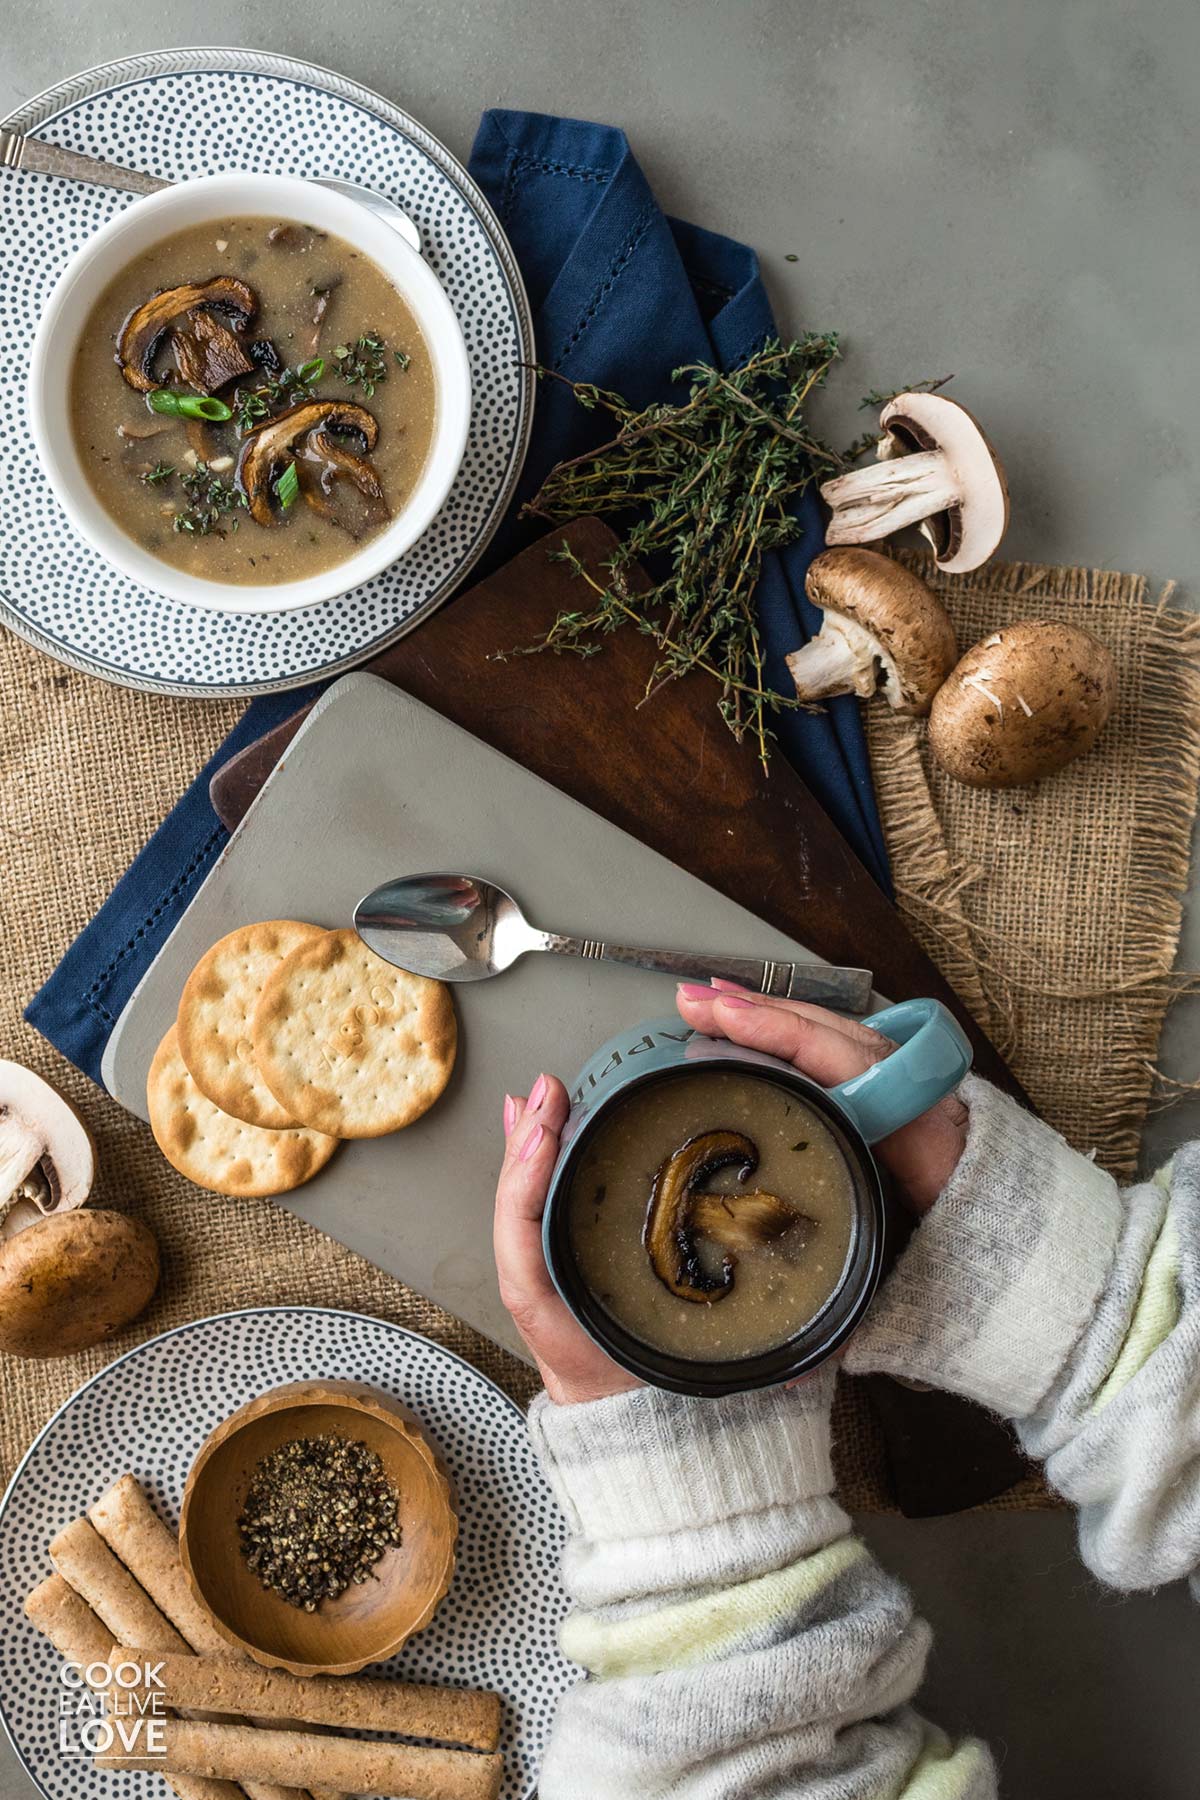 Creamy mushroom soup served up on the table for dinner. Hands clutching cup of soup.